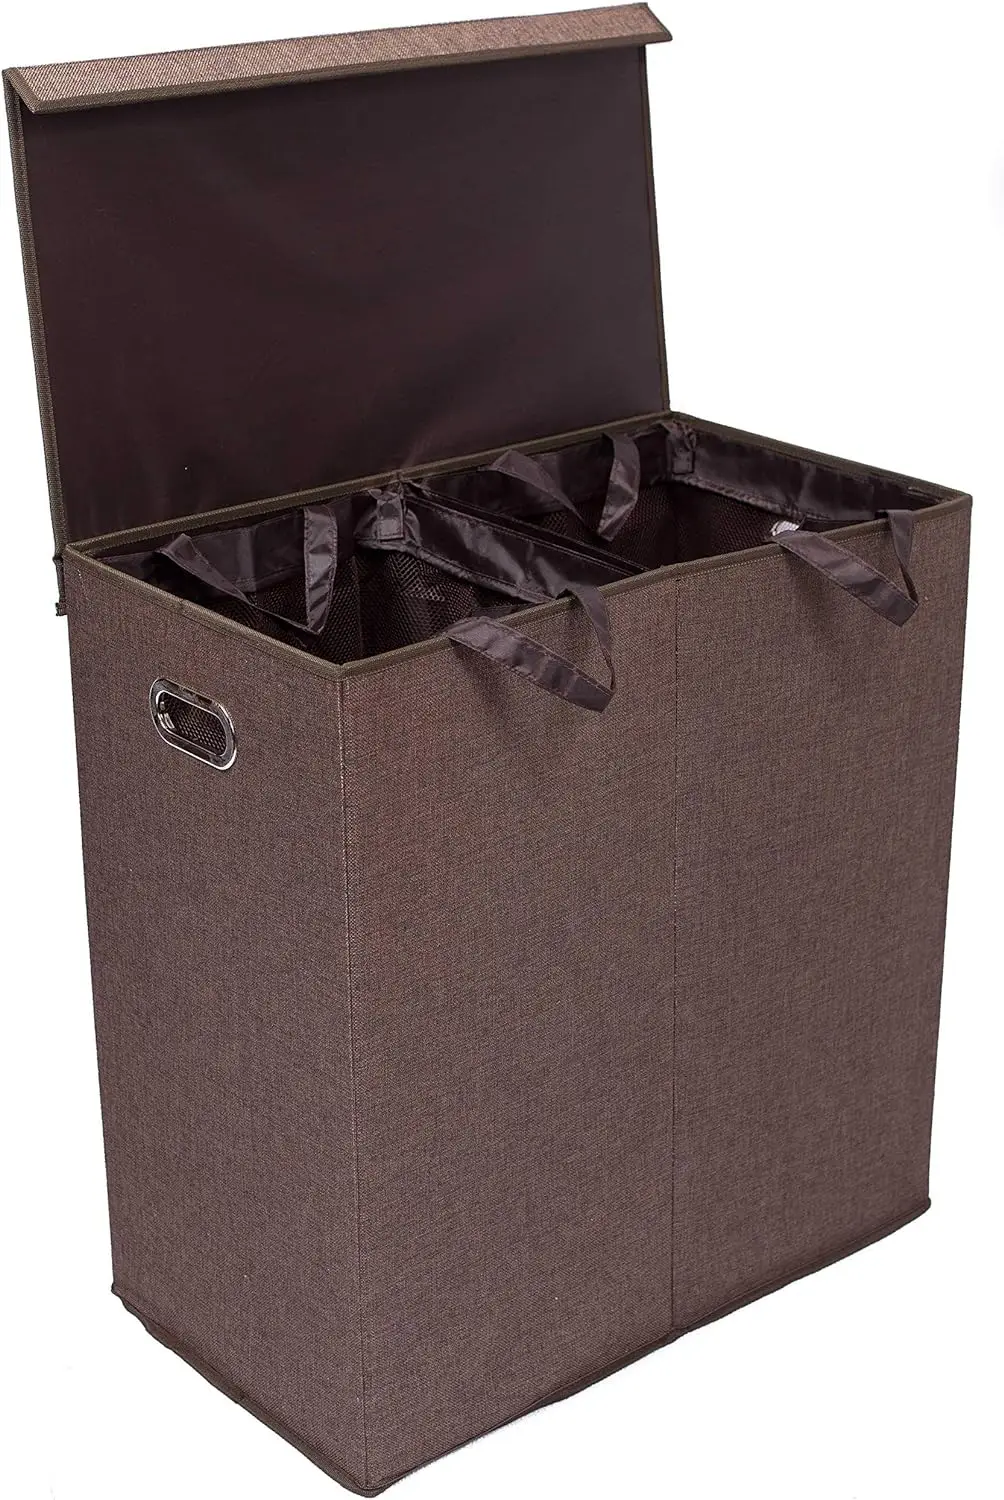 

Double Laundry Hamper with Lid | Removable mesh bags | Dual Compartment Clothes Hamper | Brown